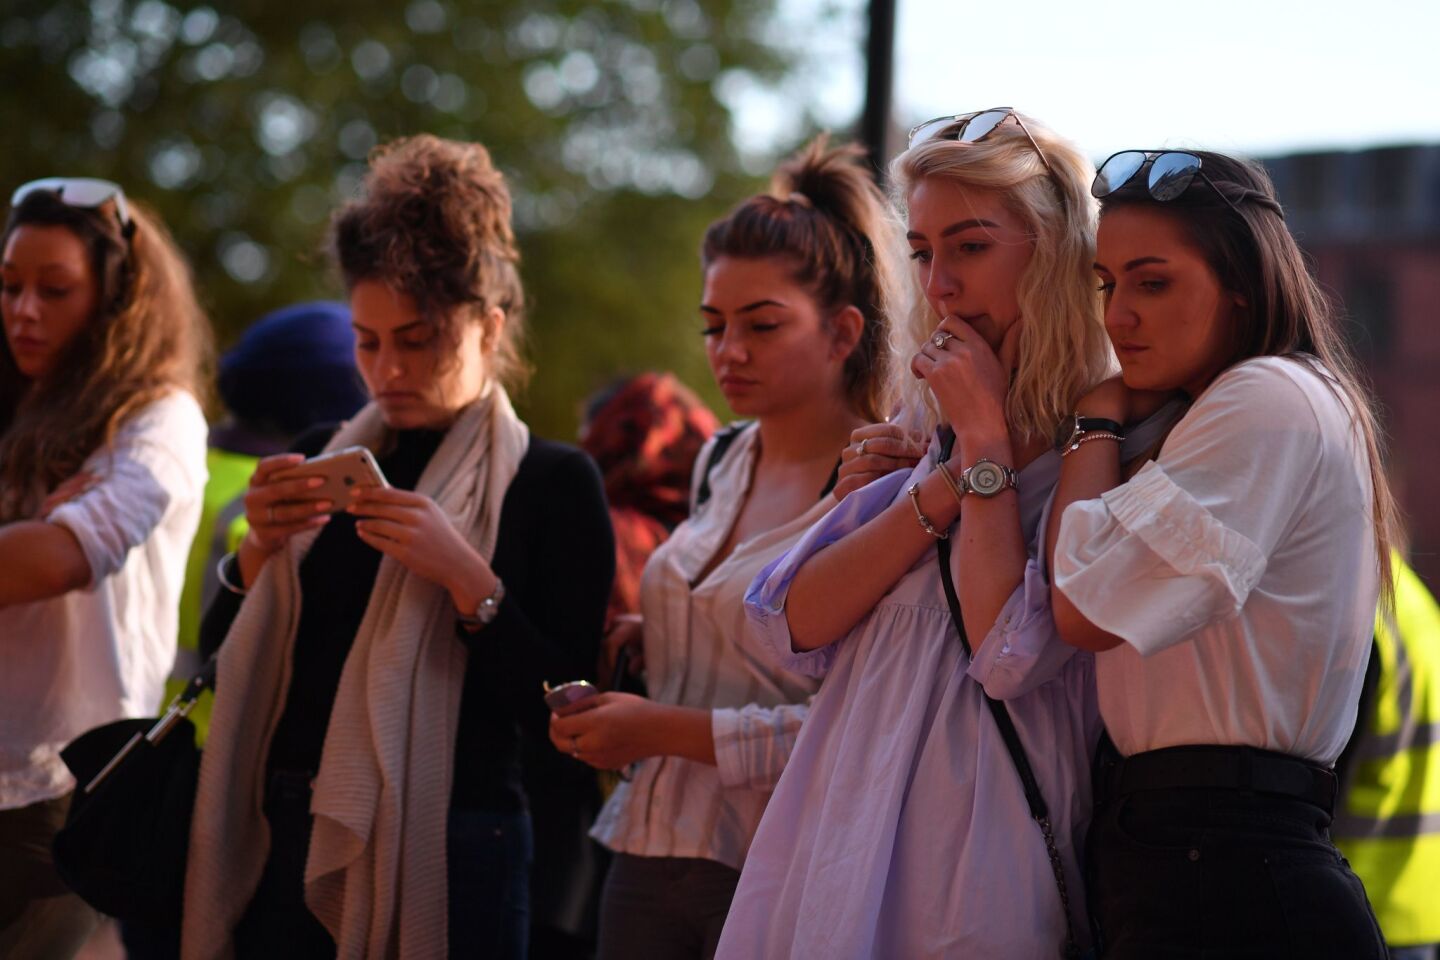 People pause in front of candles set up in Albert Square in Manchester, England.